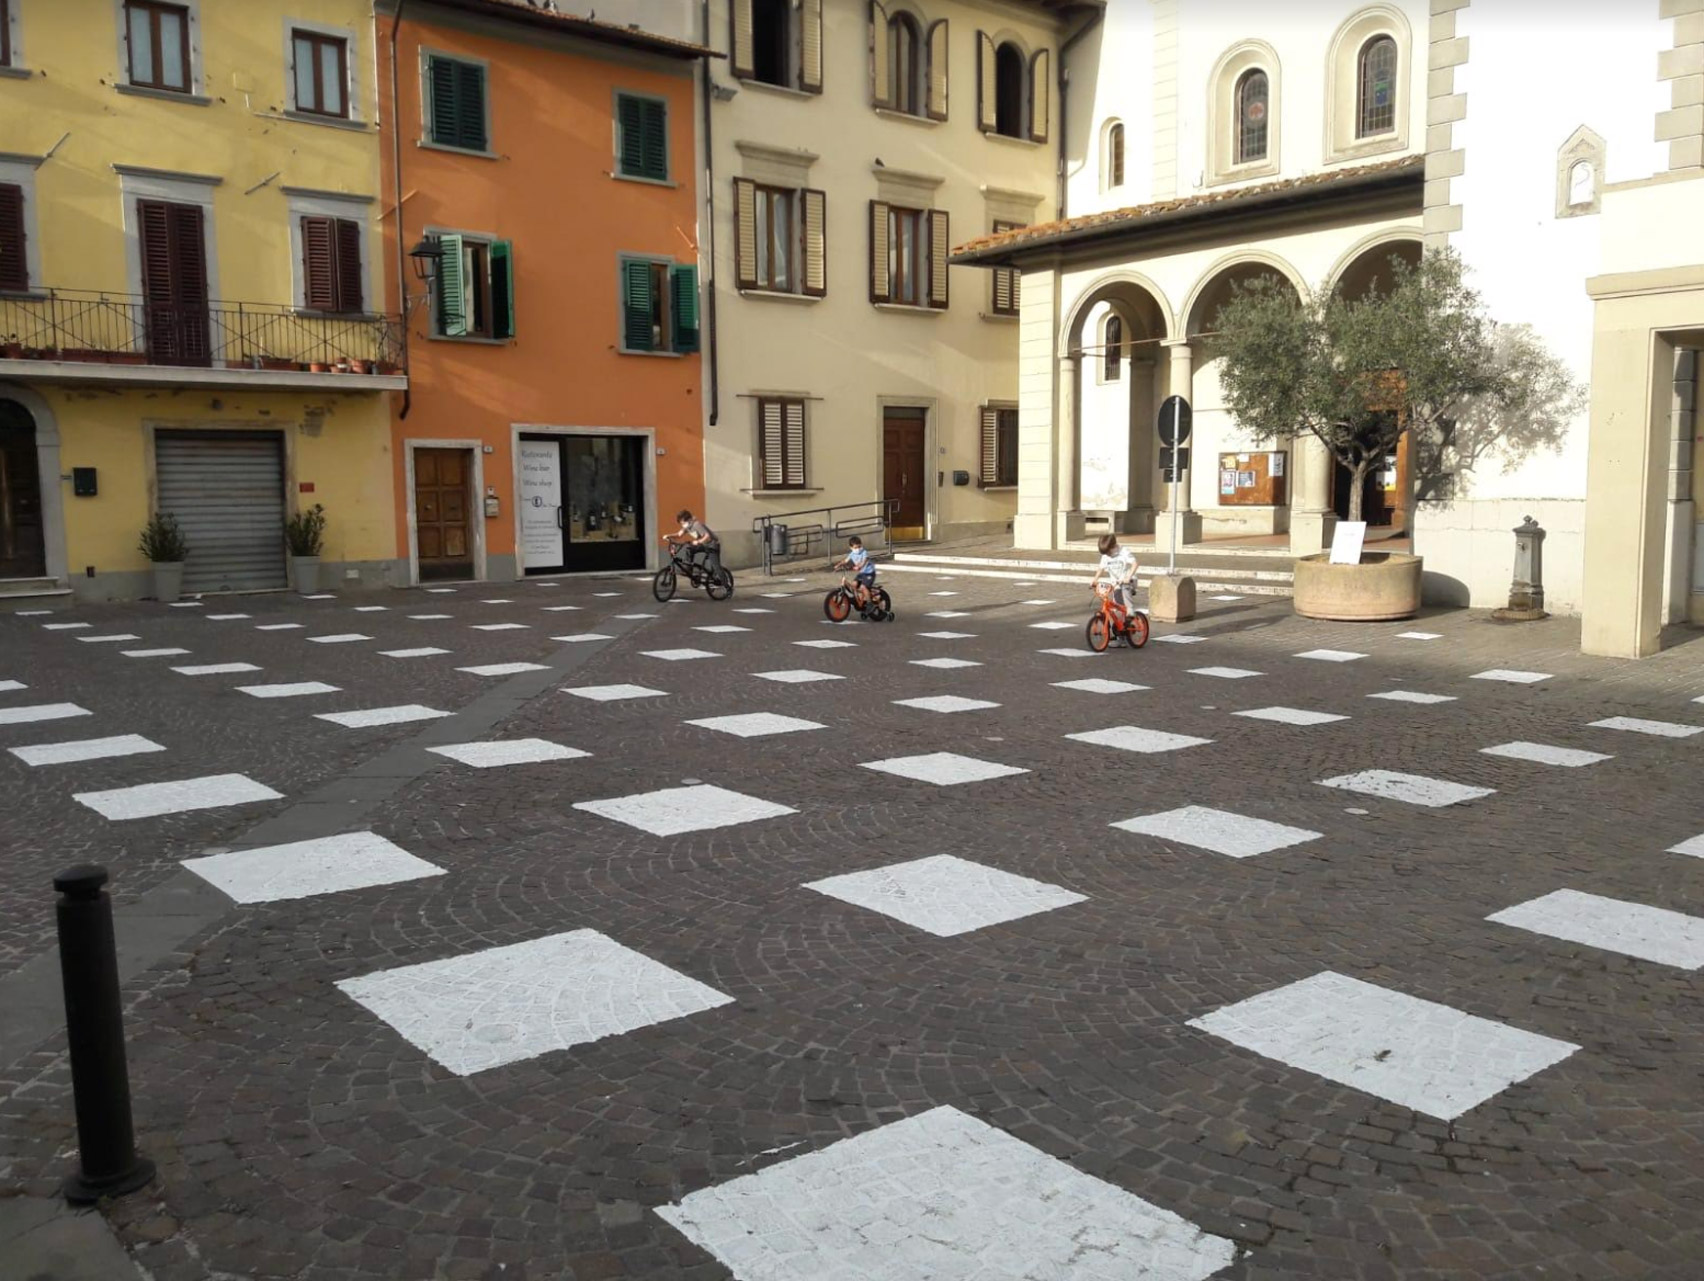 An empty plaza with white squares painted on the ground, arranged in a grid distanced apart.